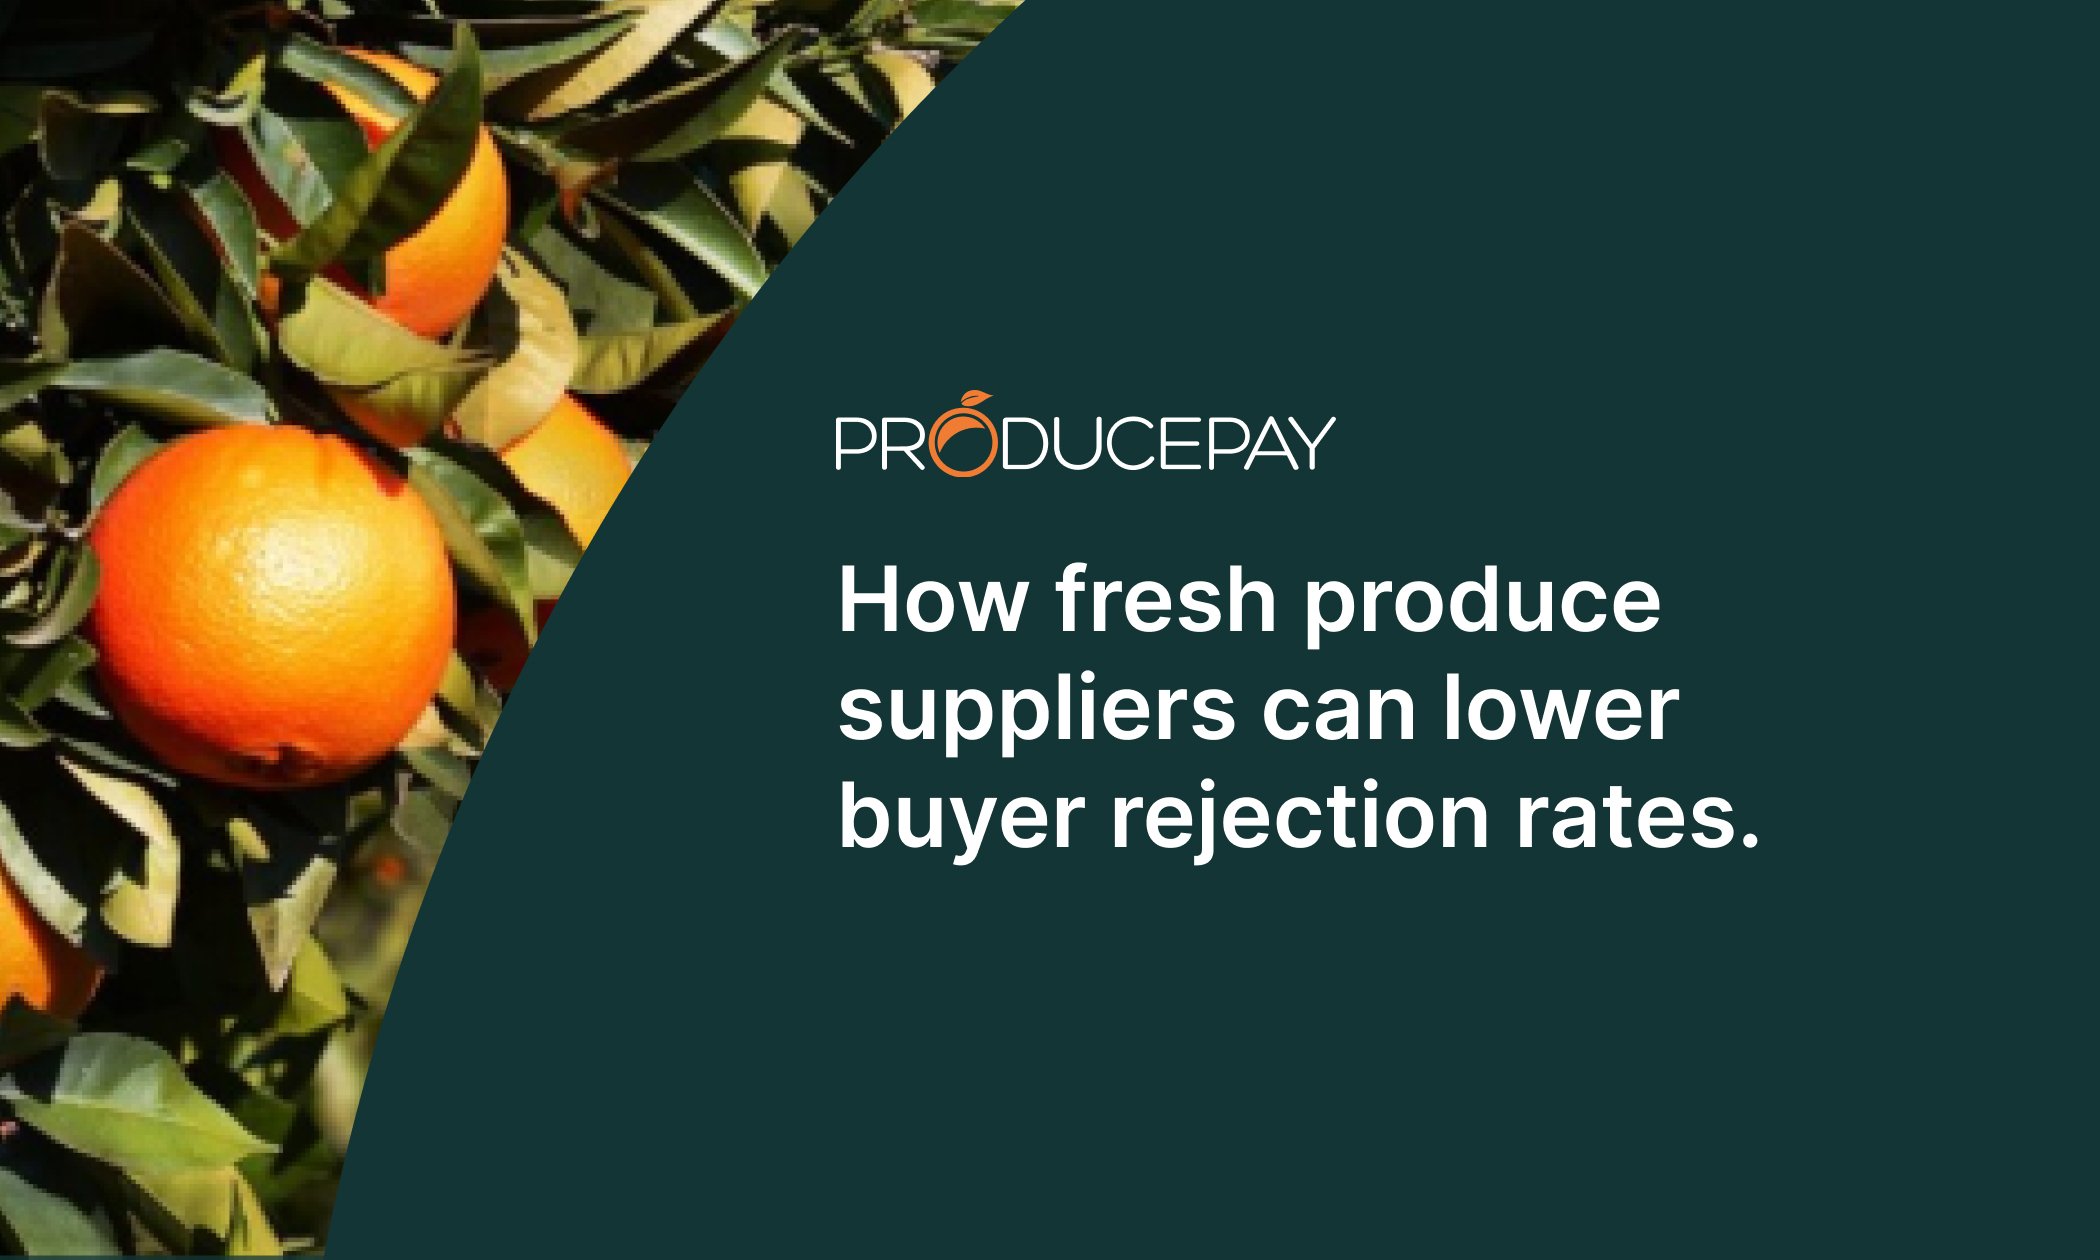 How fresh produce suppliers can lower buyer rejection rates